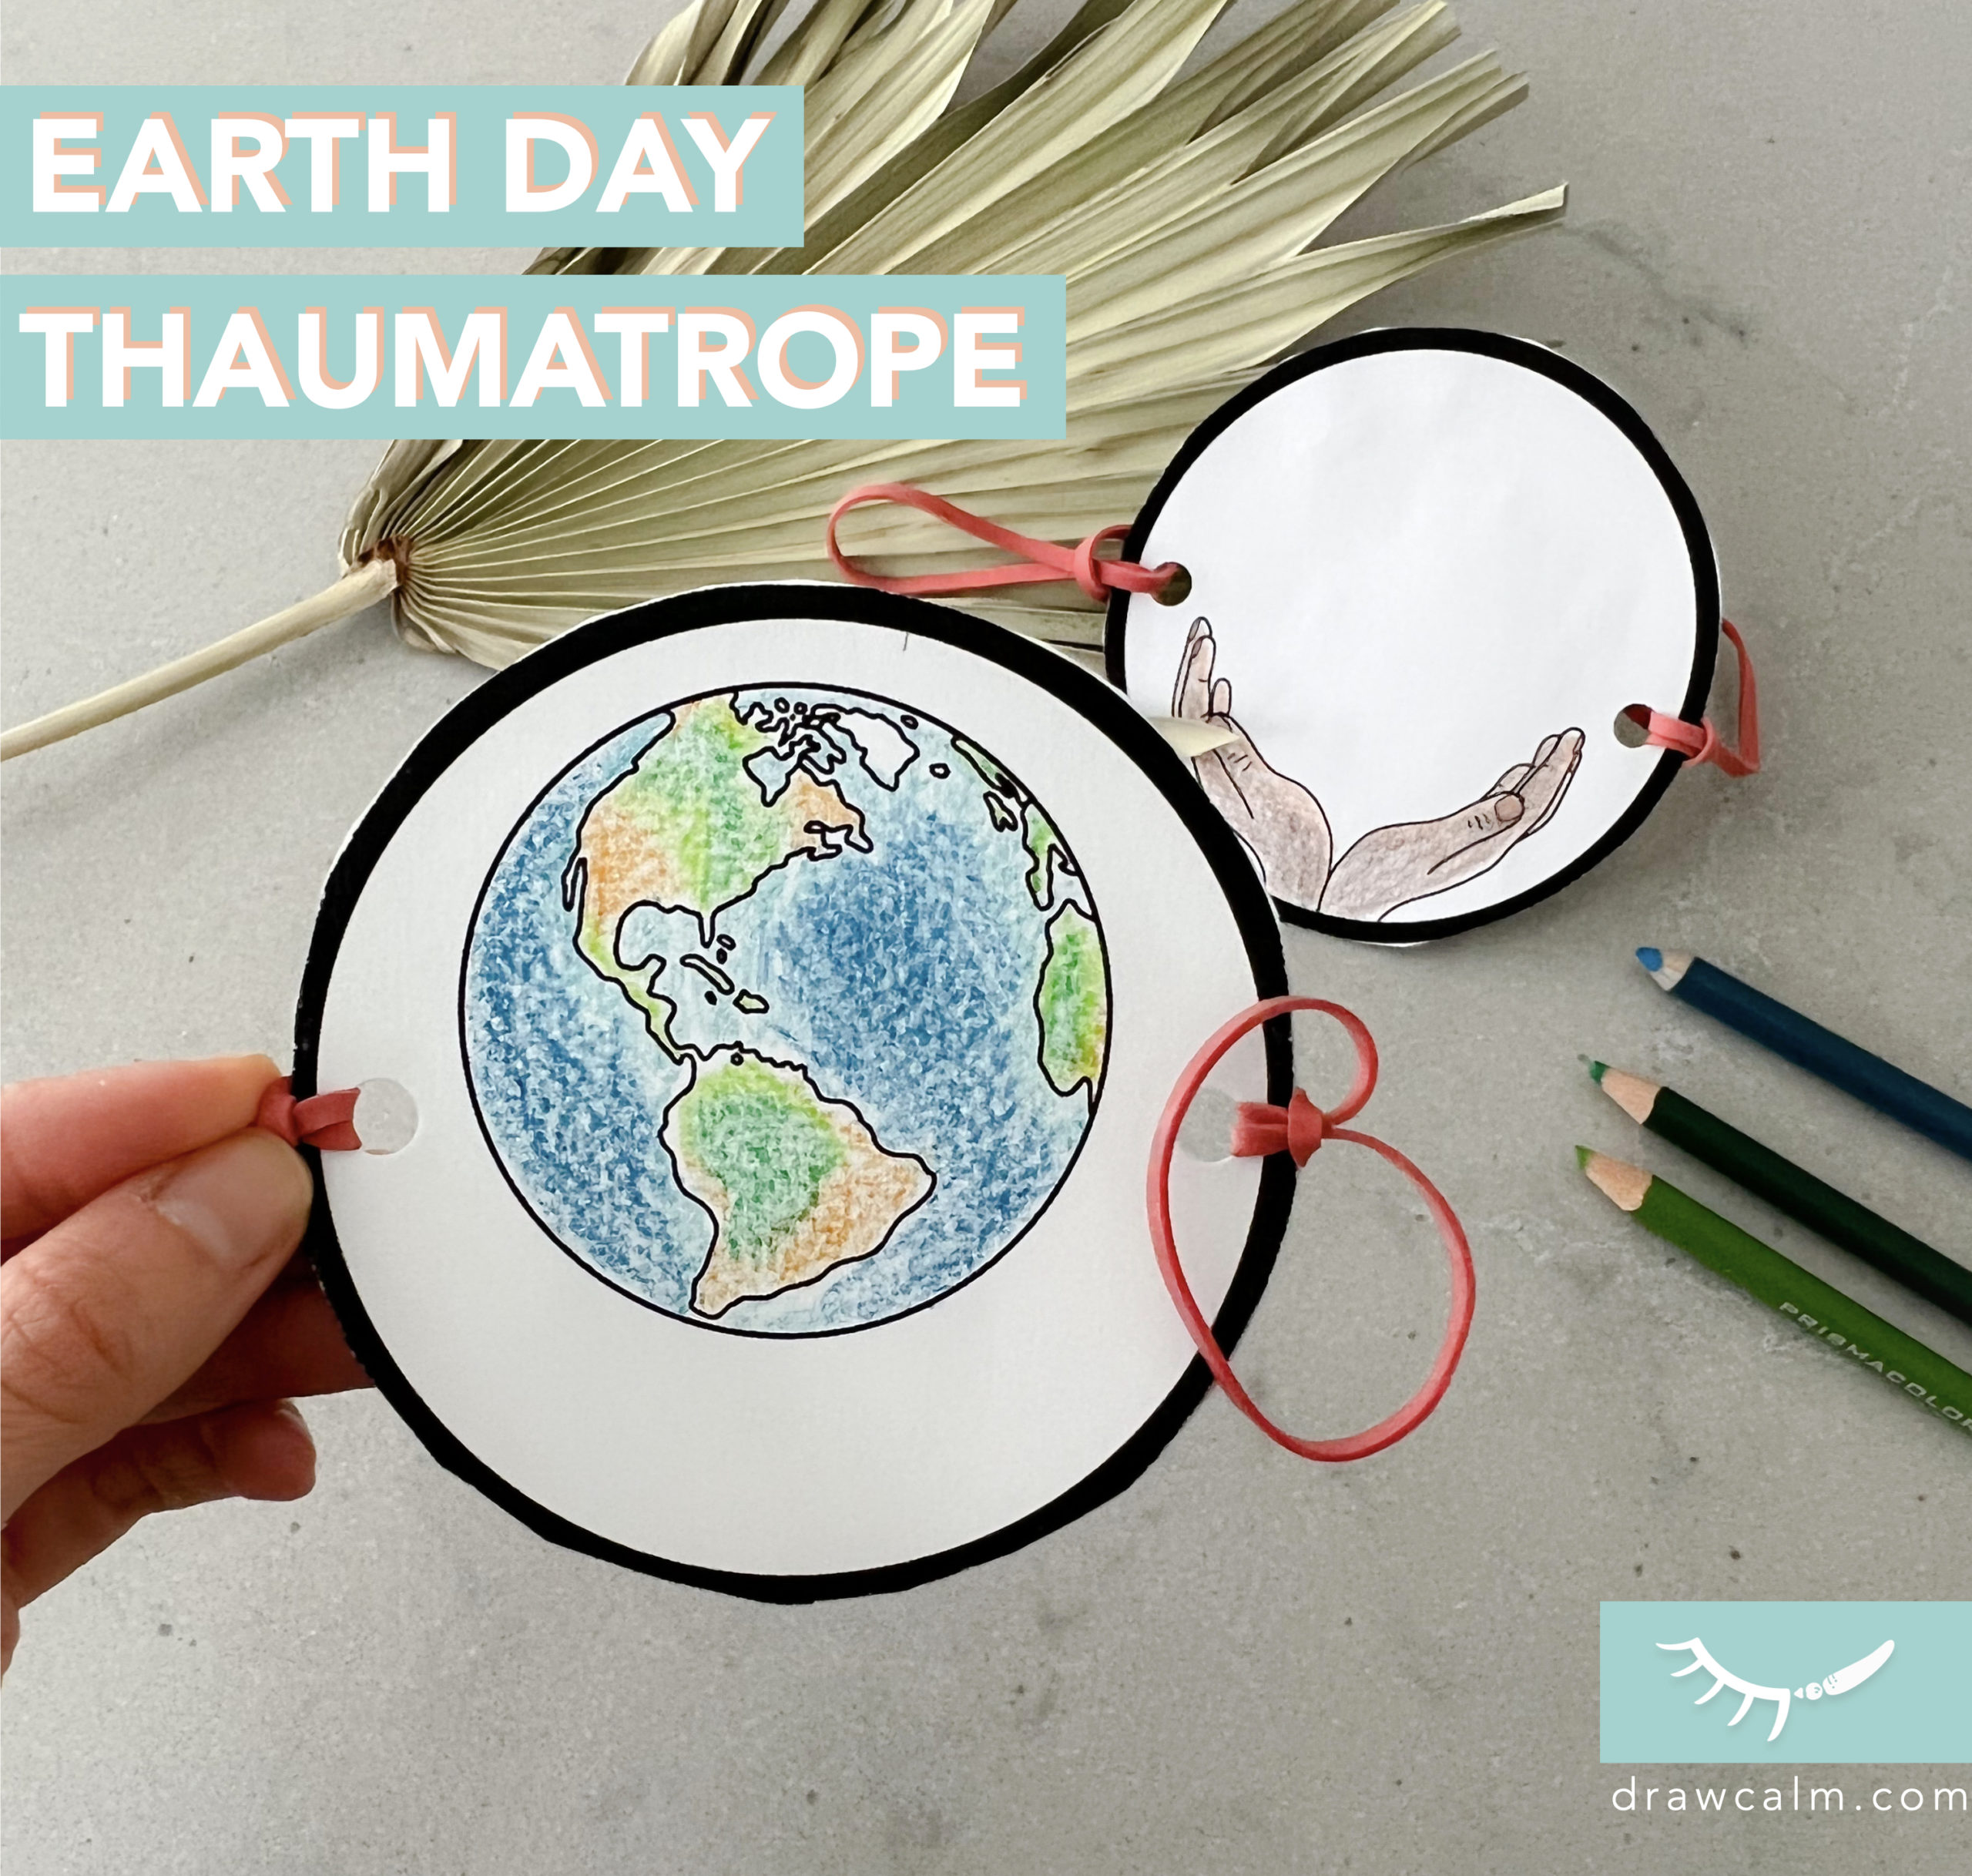 Printable thaumatrope craft showing an earth on one side and hands on the other. When spun it looks like the hands are holding the earth.